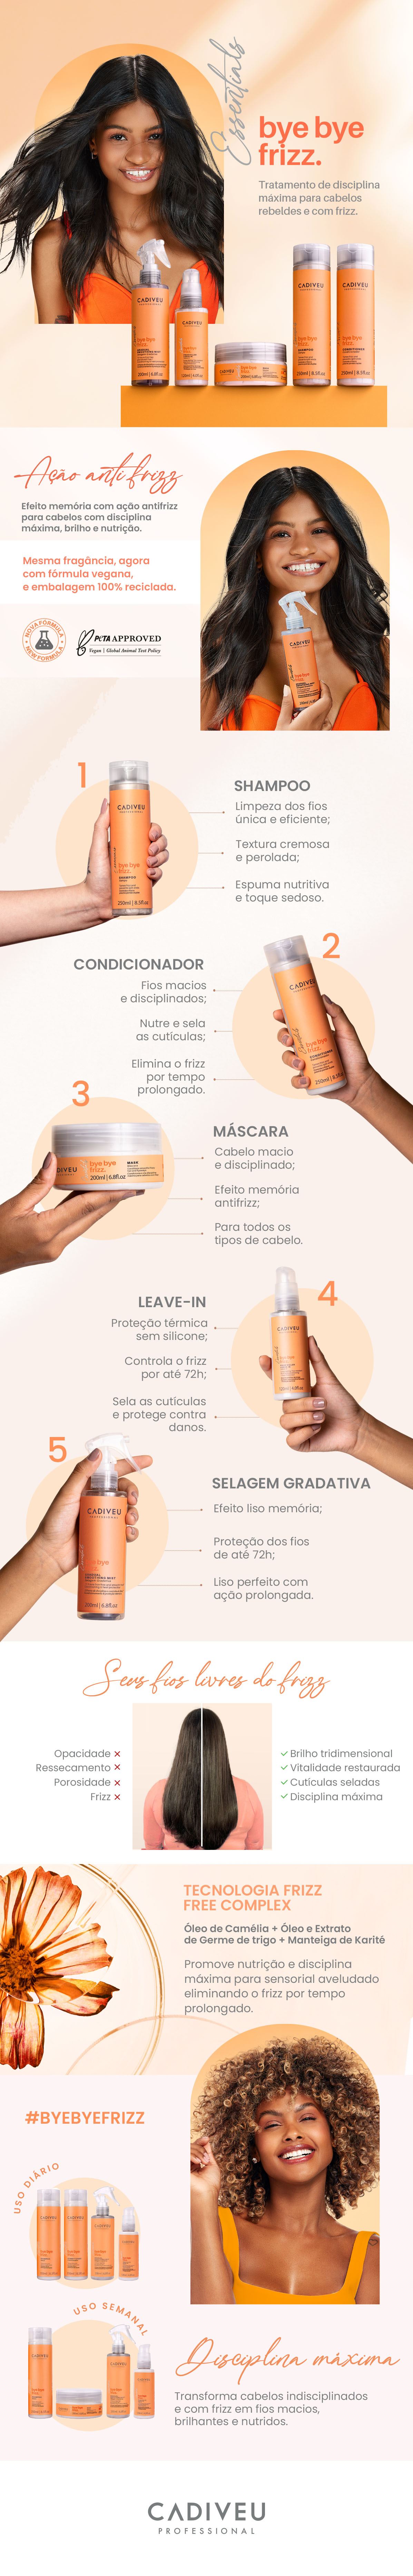 Cadiveu Essentials Bye Bye Frizz Leave In